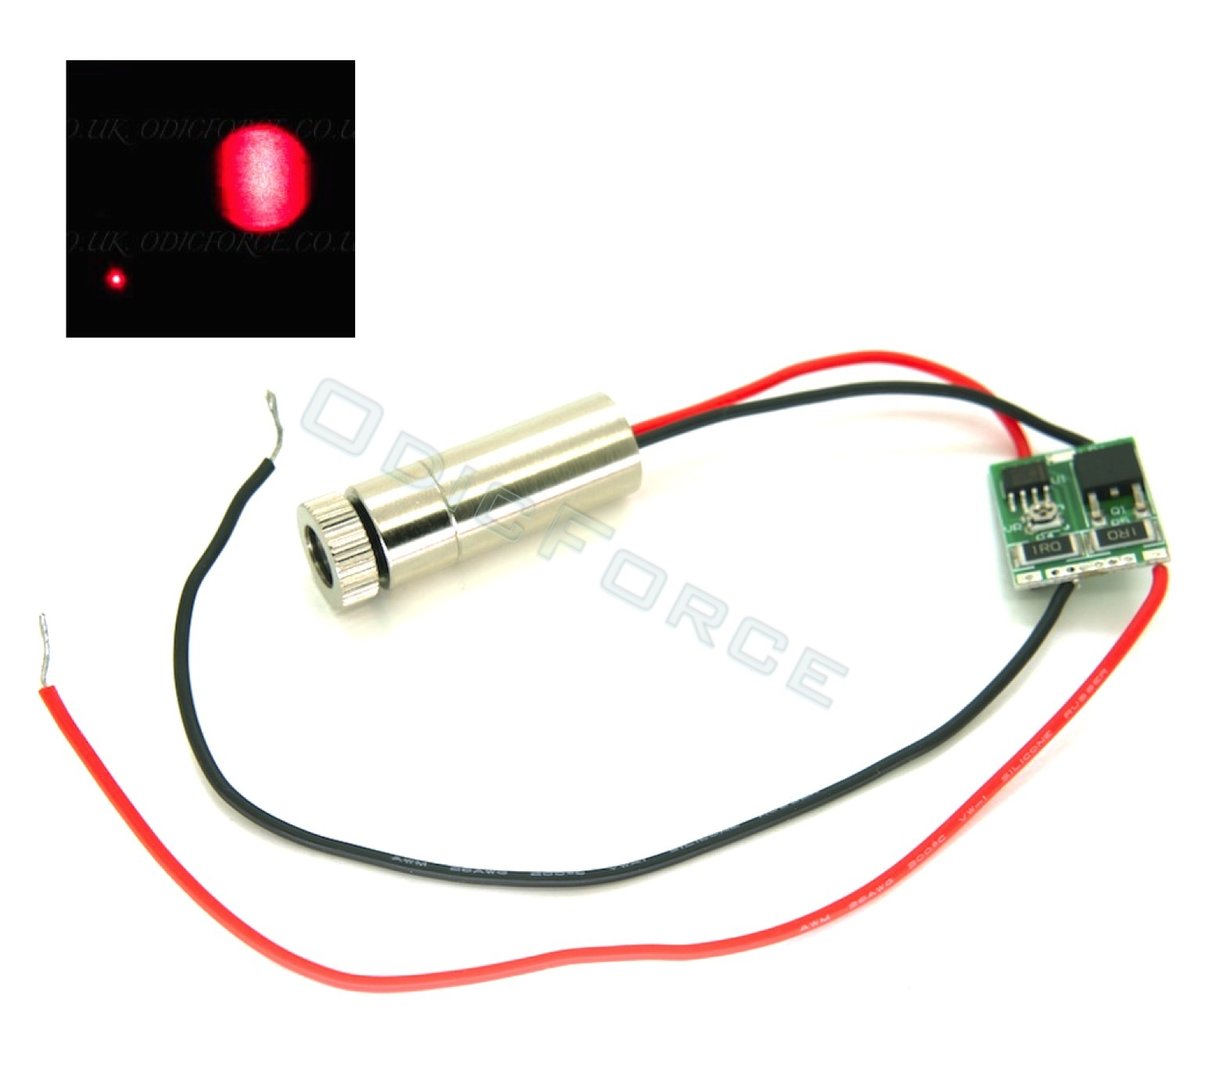 Component Bundle for 650nm (Red) 300mW+ Laser Module in Chrome Case (External Driver + Glass Lens)